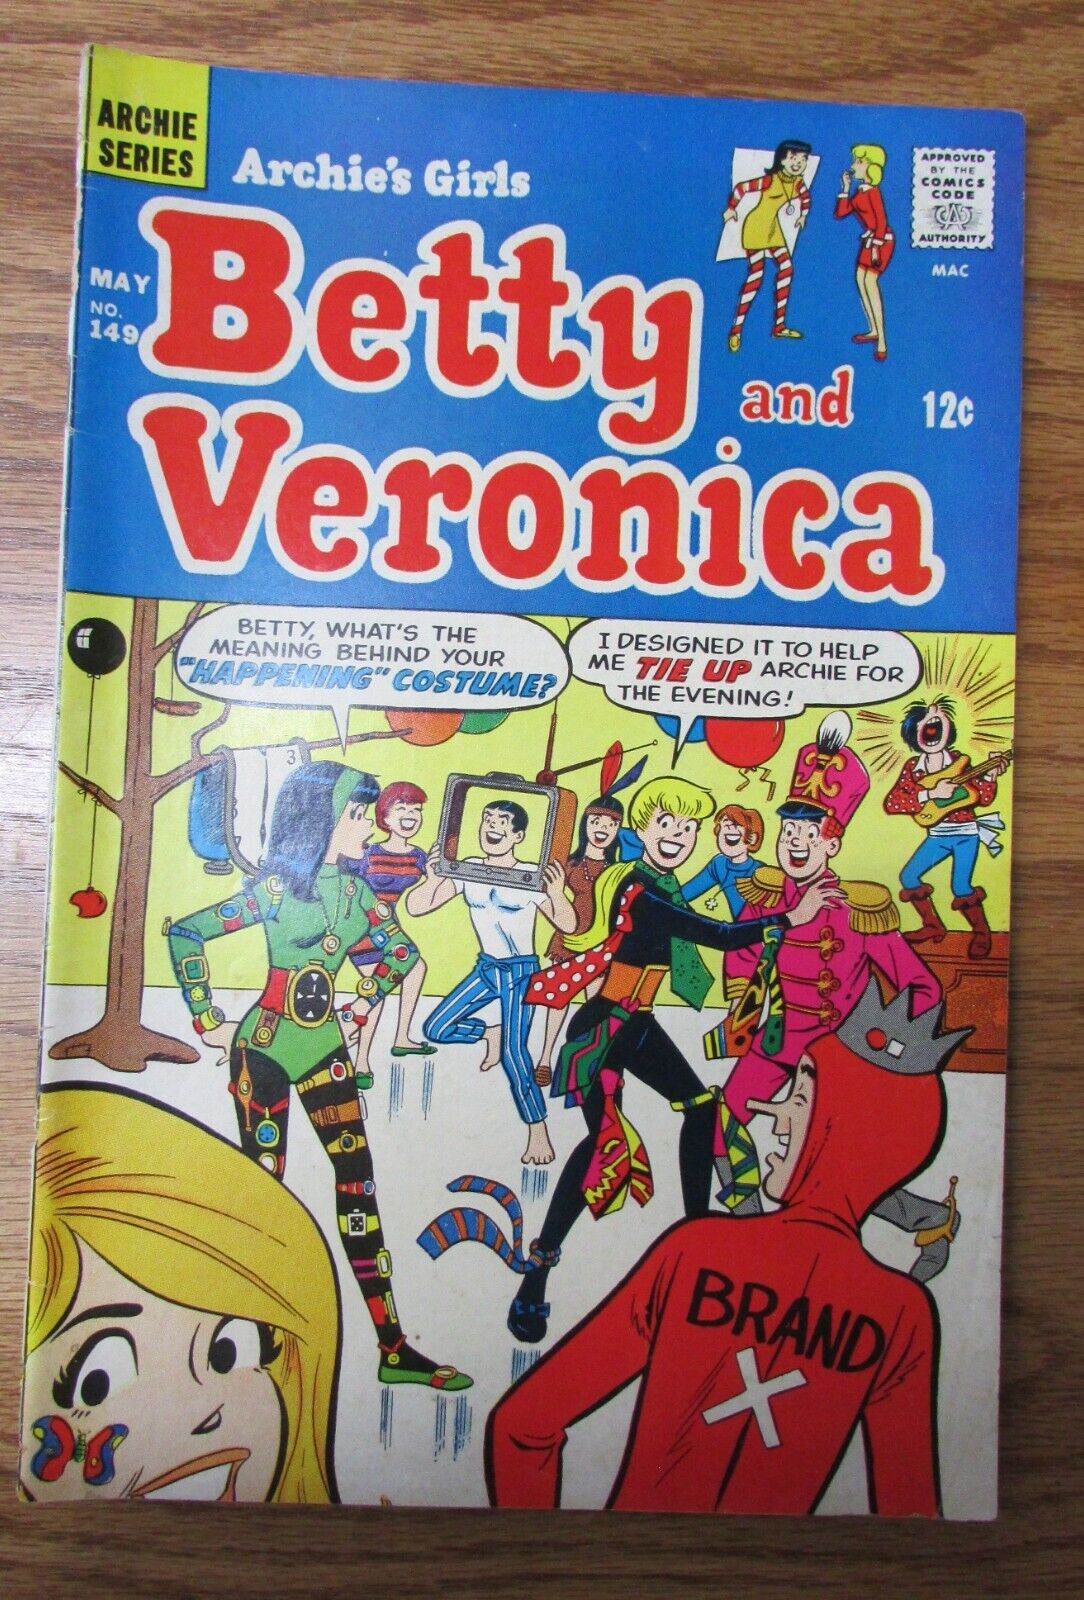 COMIC BOOK ARCHIE SERIES ARCHIE\'S GIRLS BETTY AND VERONICA #149 MAY 1968 12¢